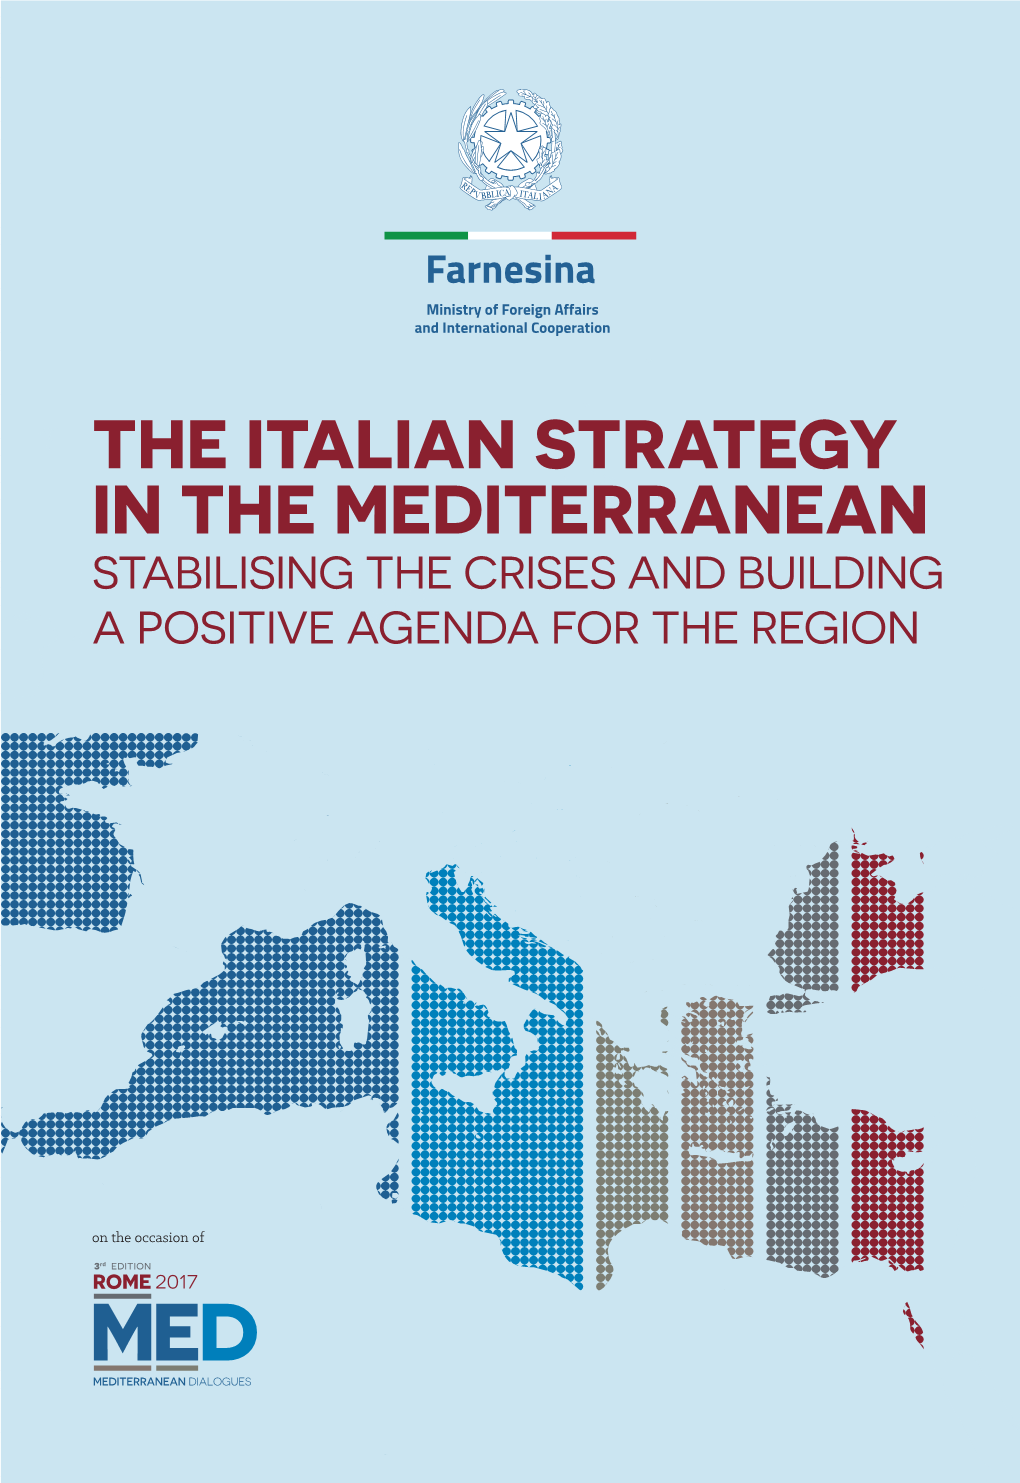 The Italian Strategy in the Mediterranean Stabilising the Crises and Building a Positive Agenda for the Region